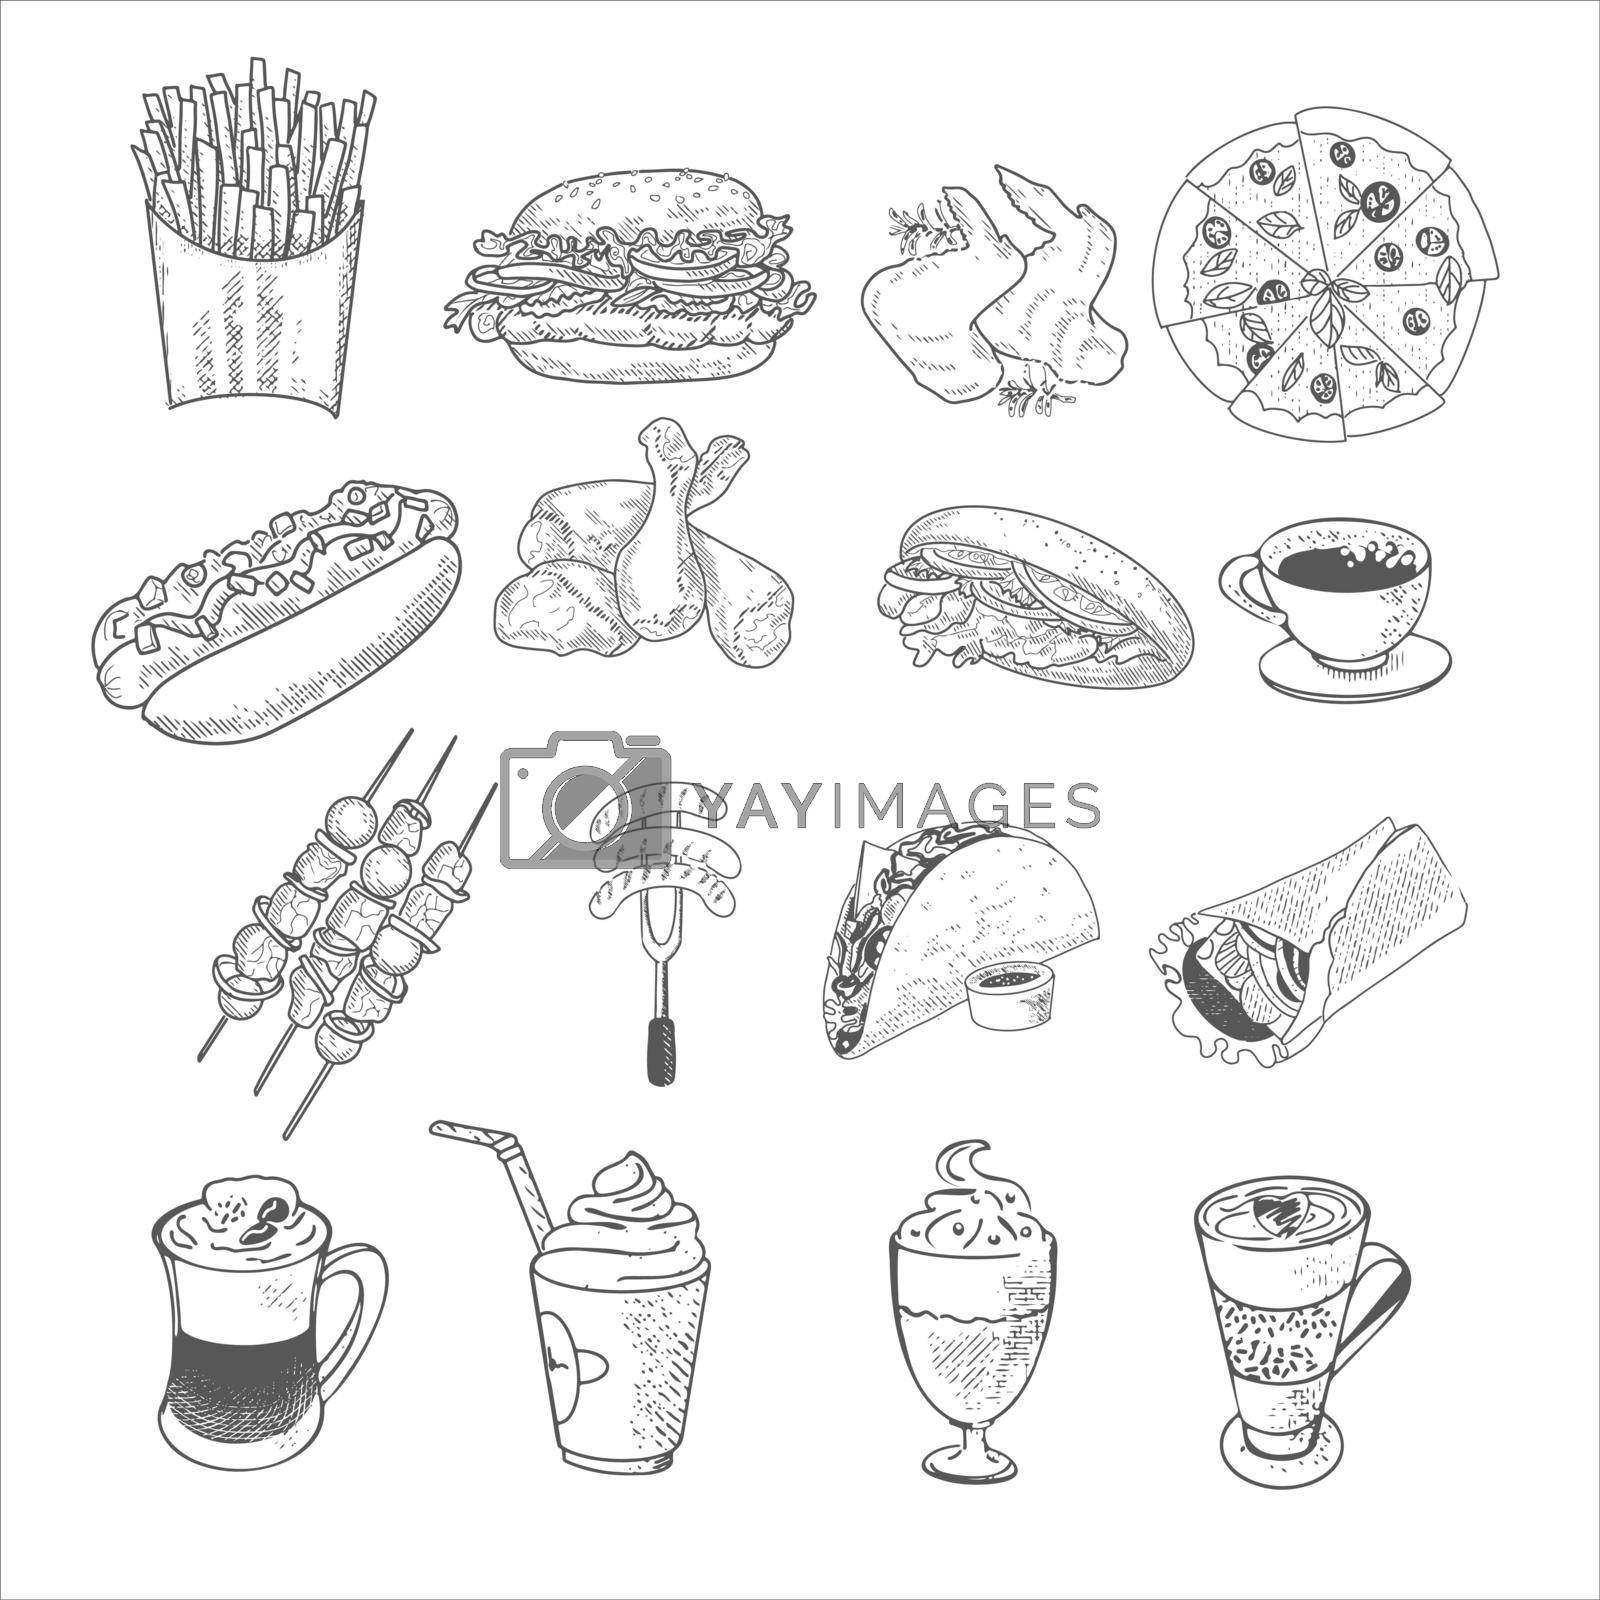 A set of fast food lunch dishes. Classic burger, package of French fries, fried crispy chicken leg, barbecue, grilled sausages, shawarma, hot dog and pizza. Sketch of the engraving food